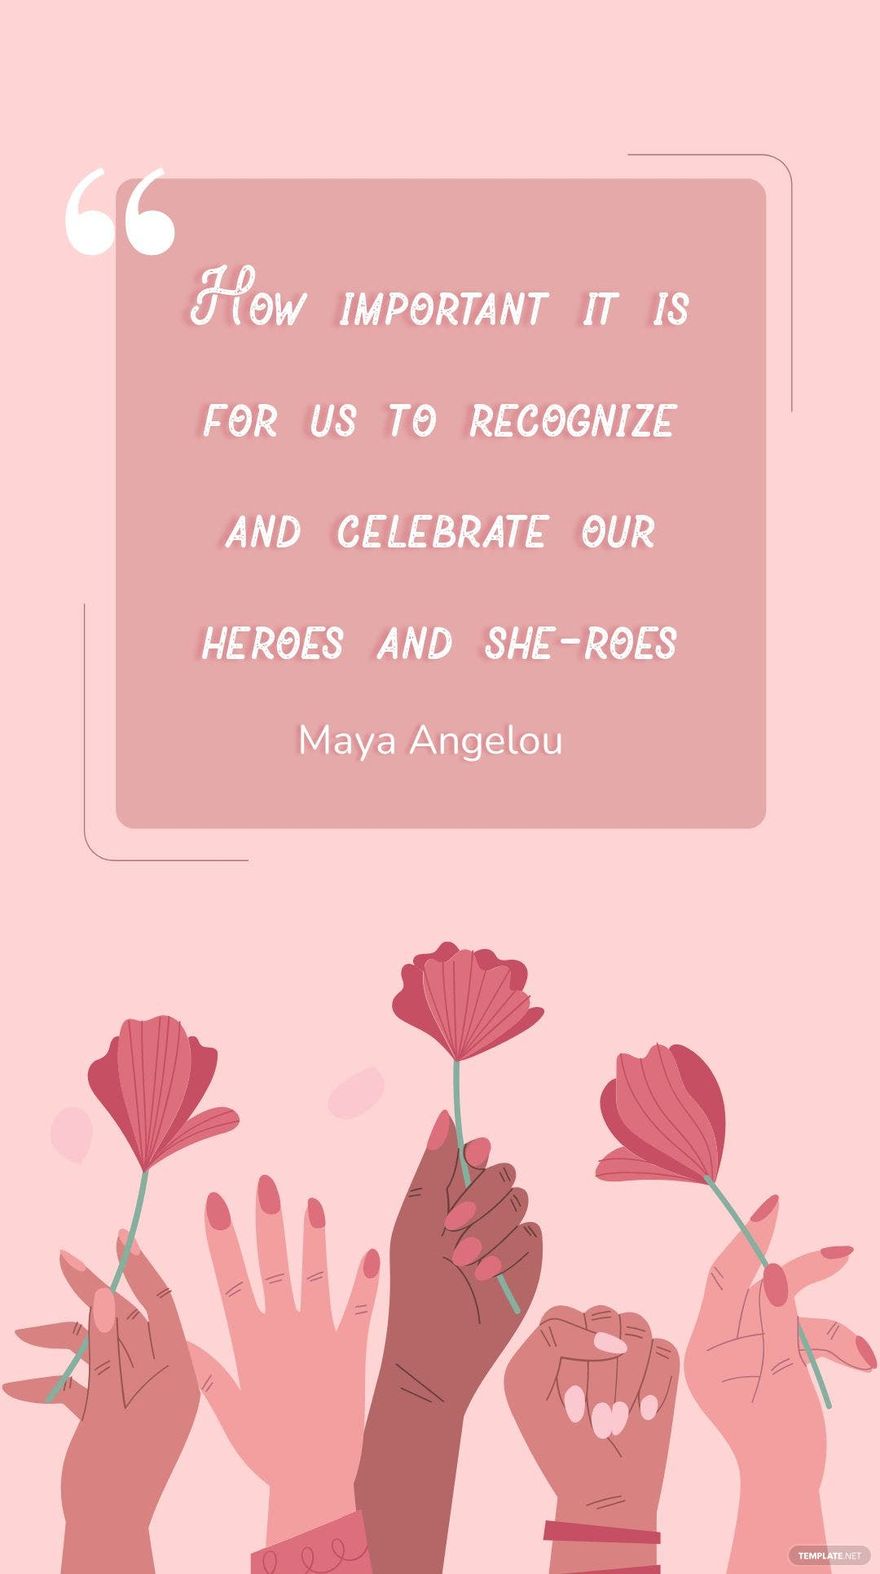 Maya Angelou - How important it is for us to recognize and celebrate our heroes and she-roes in JPG